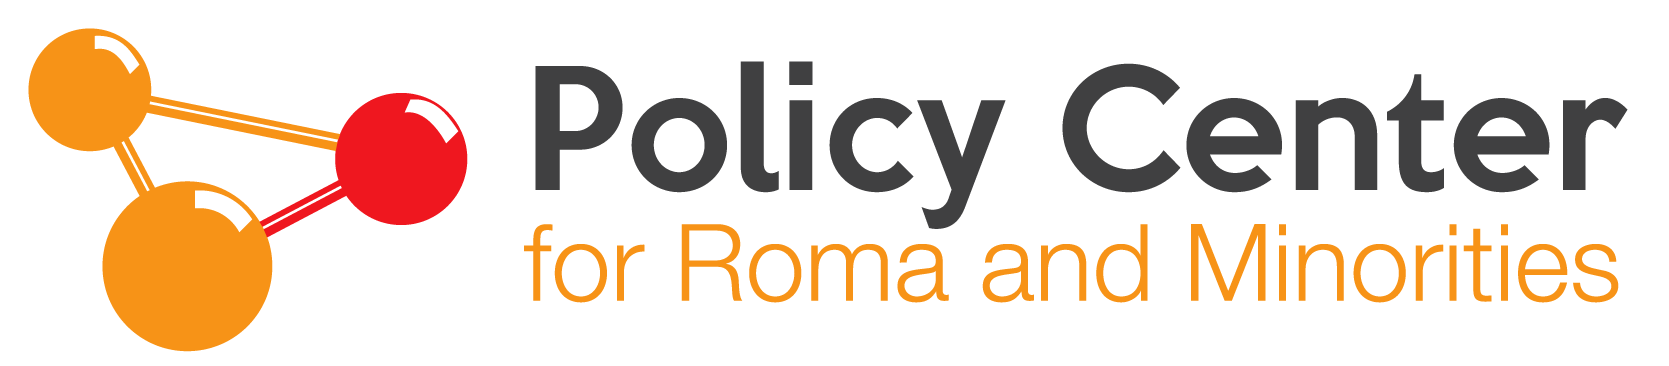 Policy Center for Roma and Minorities logo